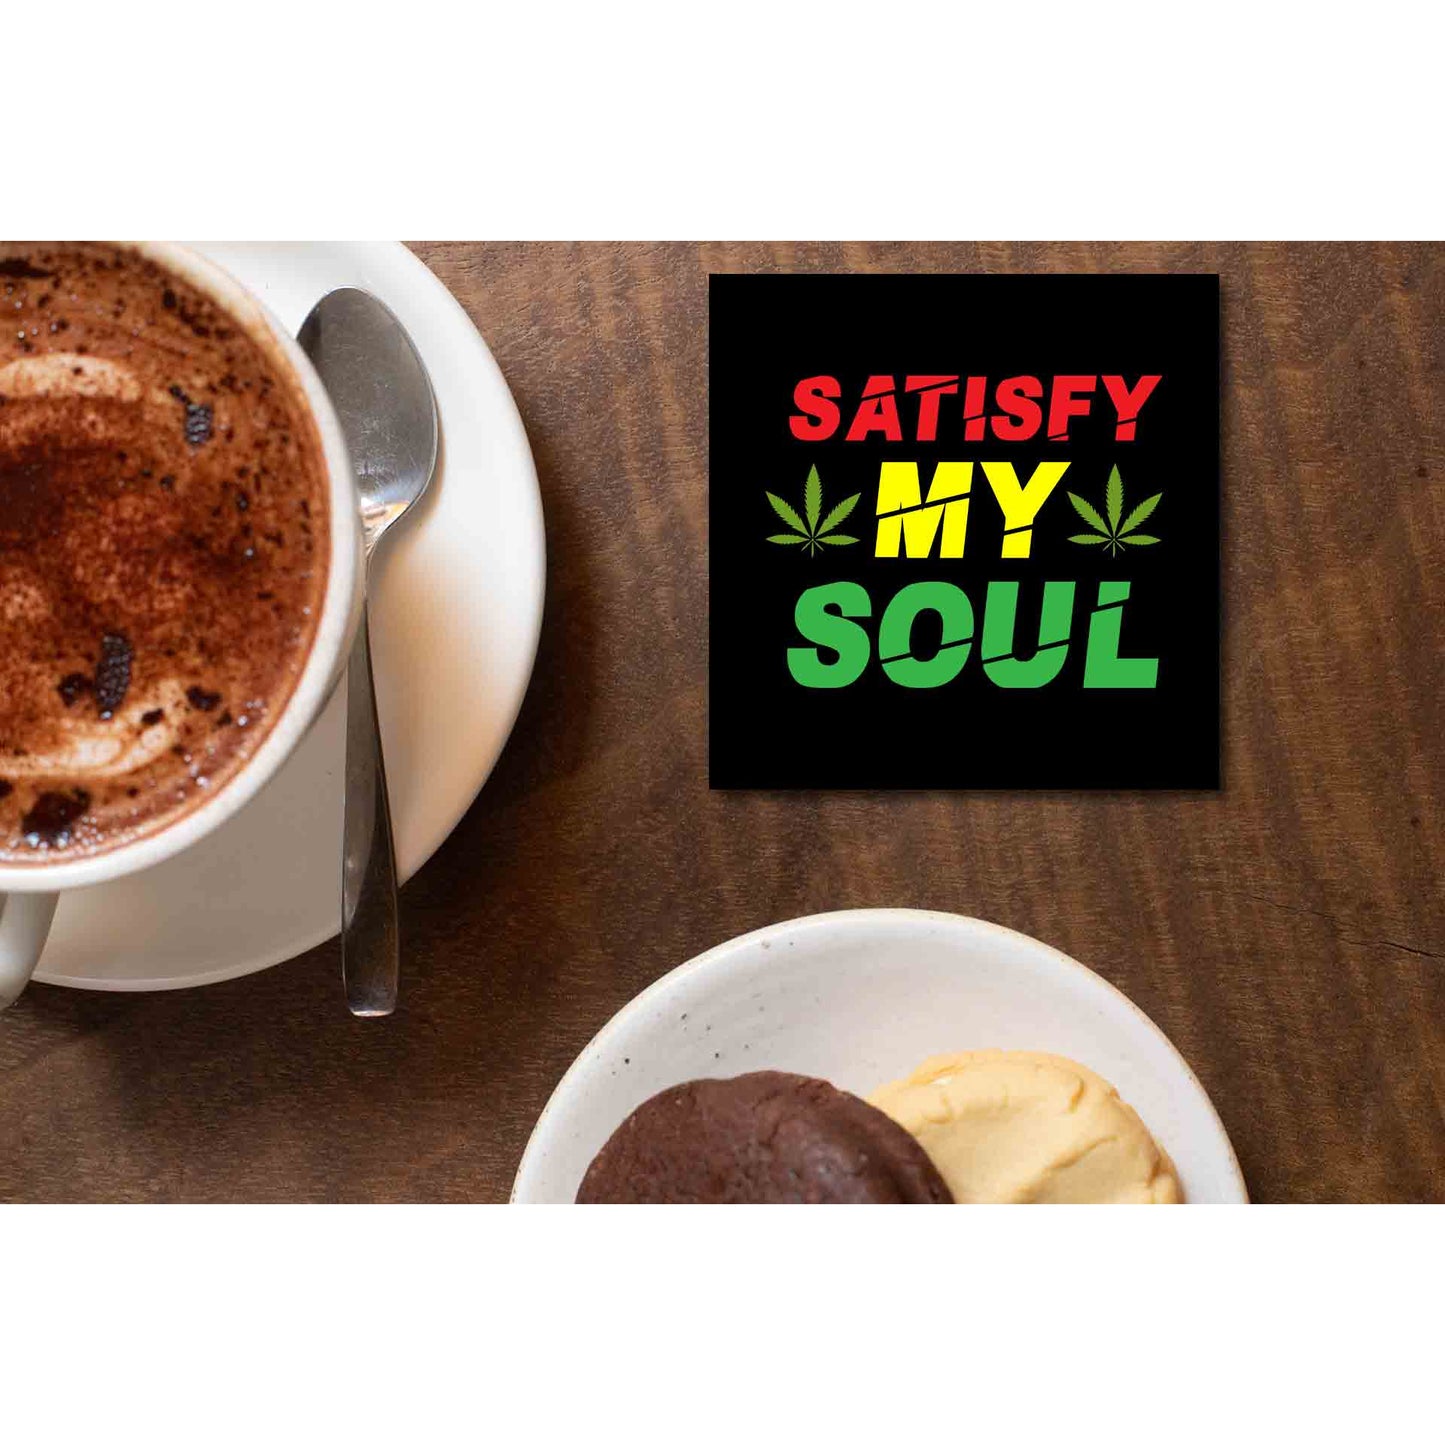 bob marley satisfy my soul coasters wooden table cups indian music band buy online india the banyan tee tbt men women girls boys unisex